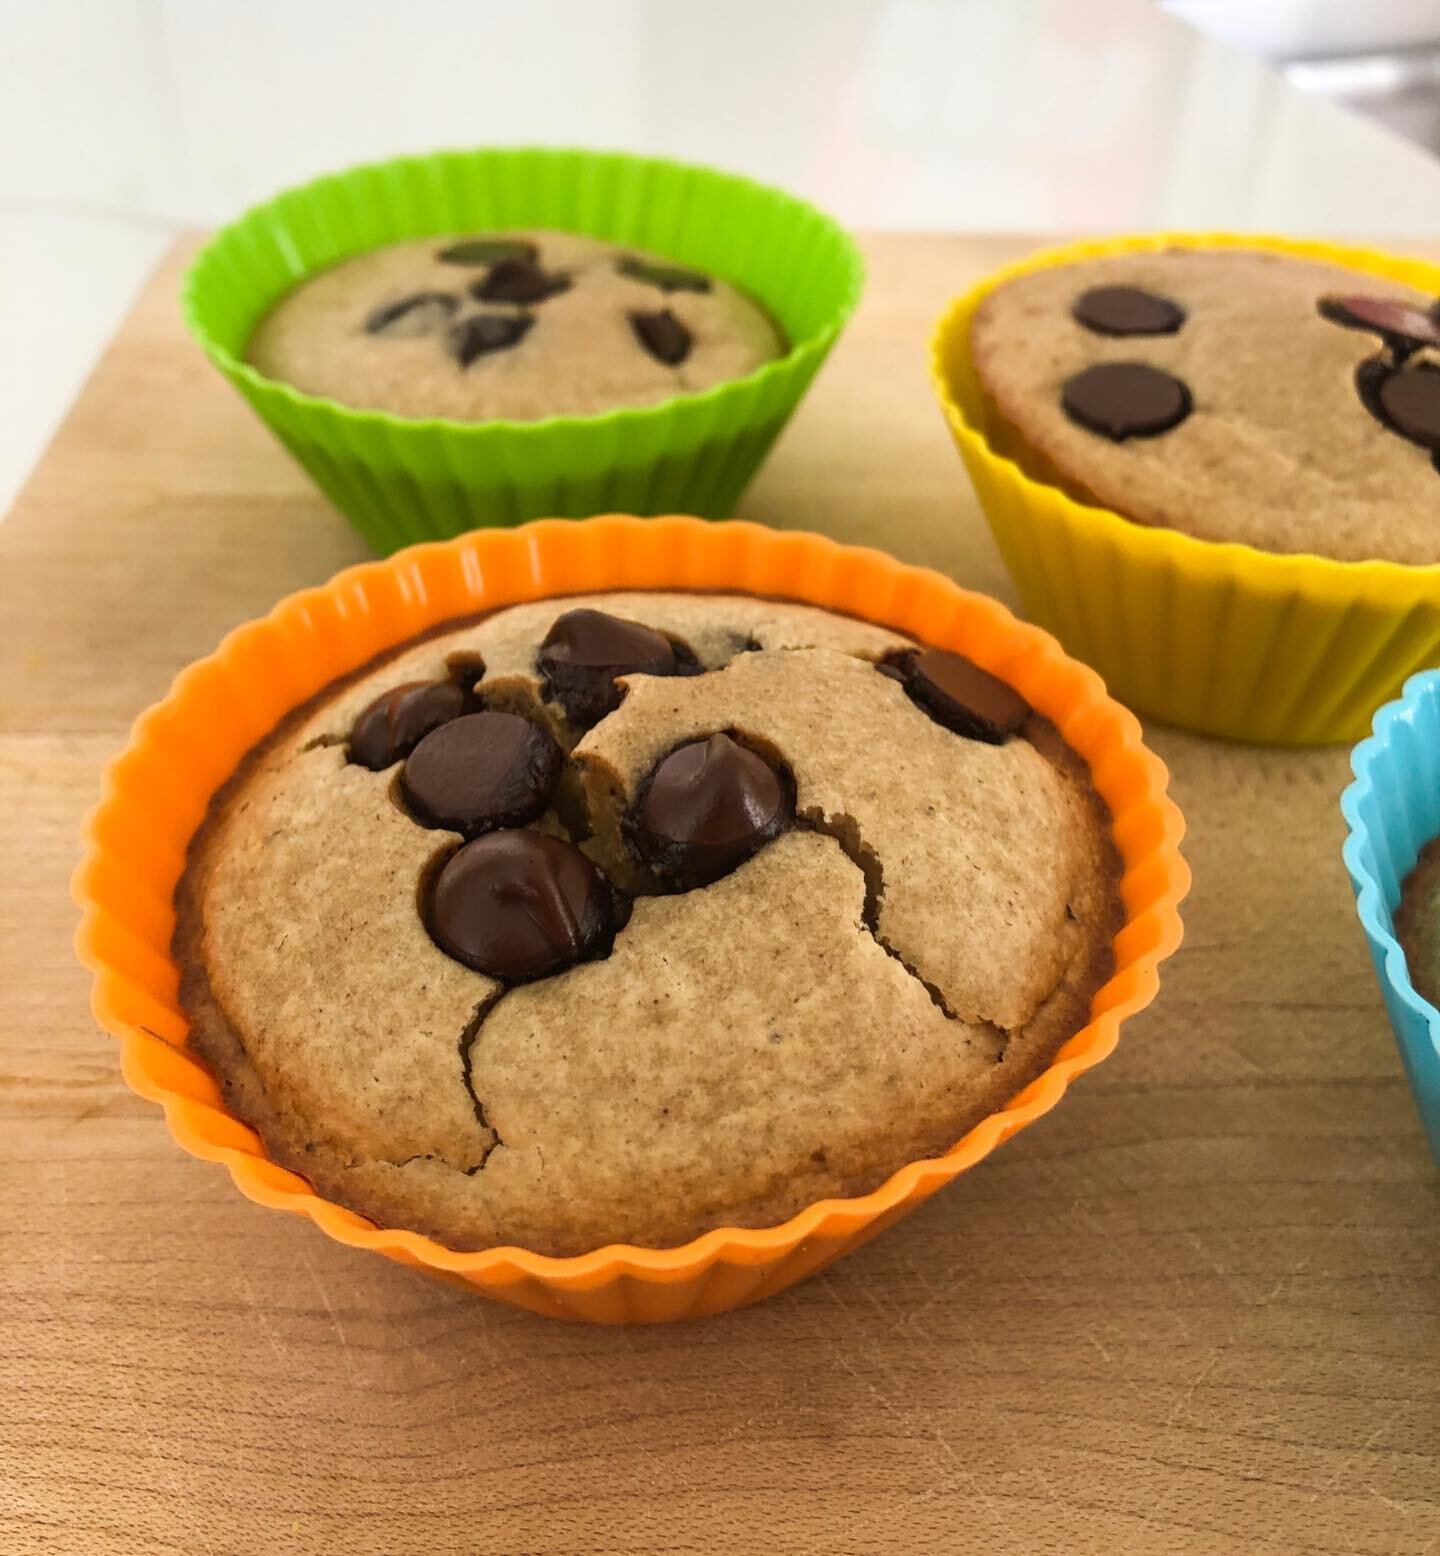 Oatmeal Chocolate Chip Muffins🎉GLUTEN-FREE + DAIRY-FREE breakfast treat! There&rsquo;s so many variations of this recipe out there, here&rsquo;s mine⬇️

1/2 cup organic oats
1/2 banana
1 egg
1 tsp maple syrup
1 tbsp peanut butter
1/4 tsp baking powd